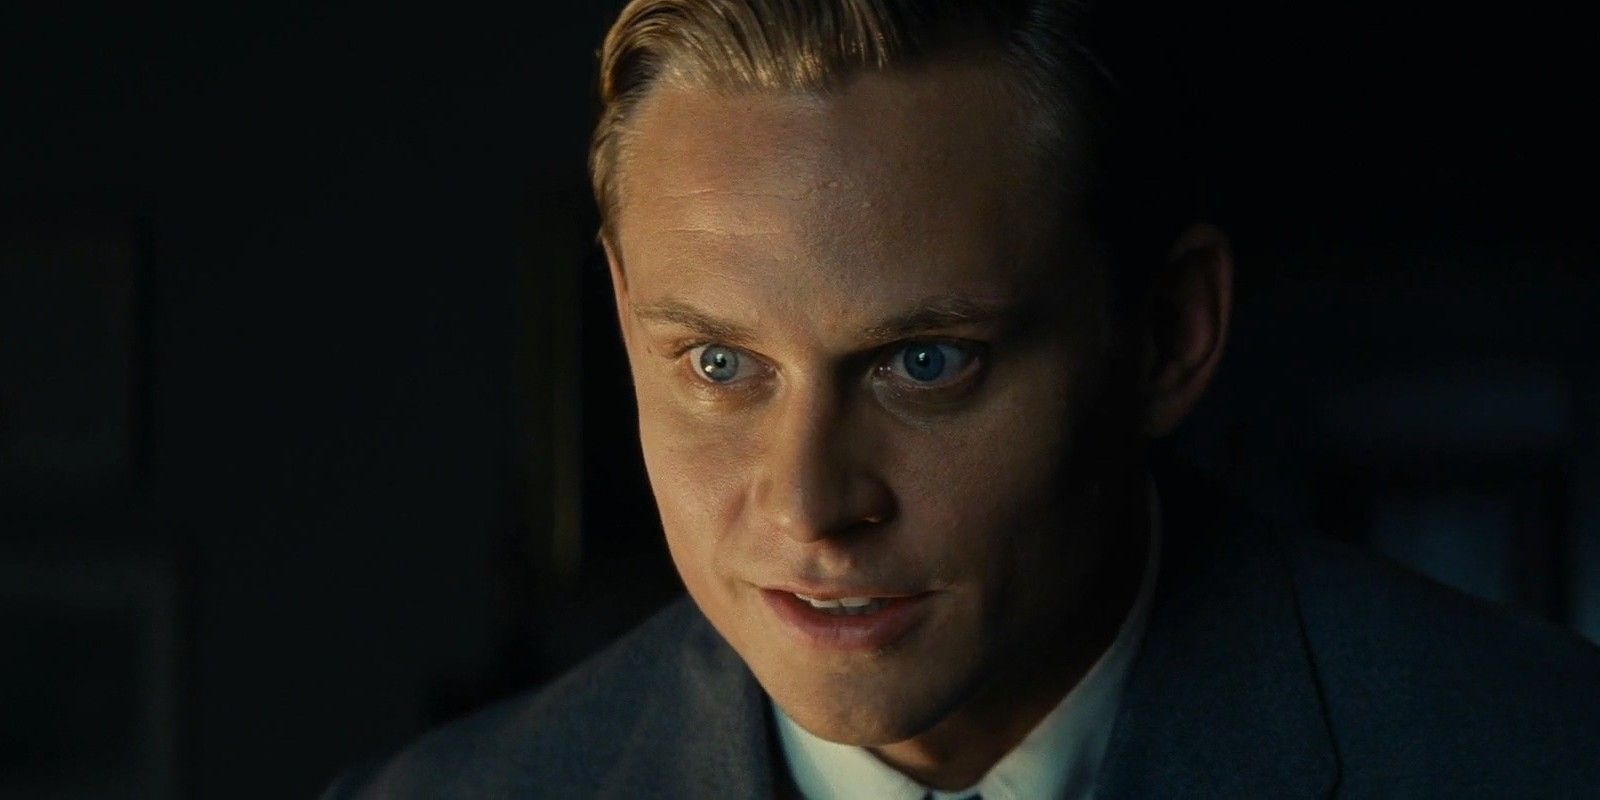 10 Best Billy Magnussen Movie And Television Roles, According To IMDb